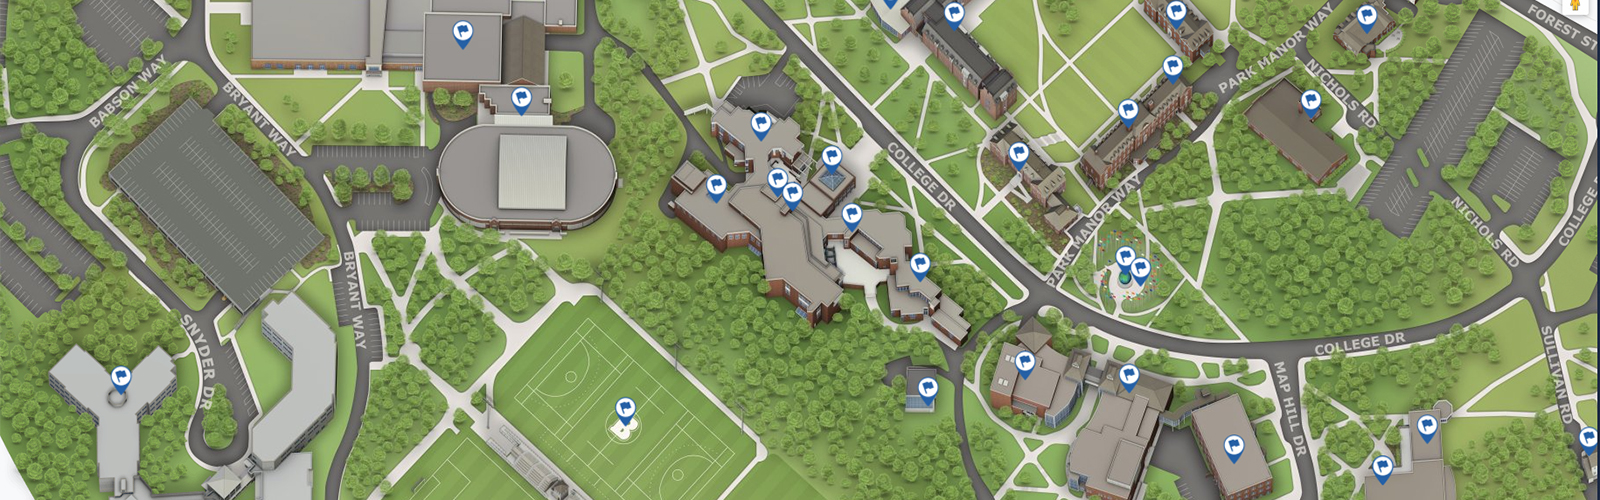 Babson Wellesley Campus Map